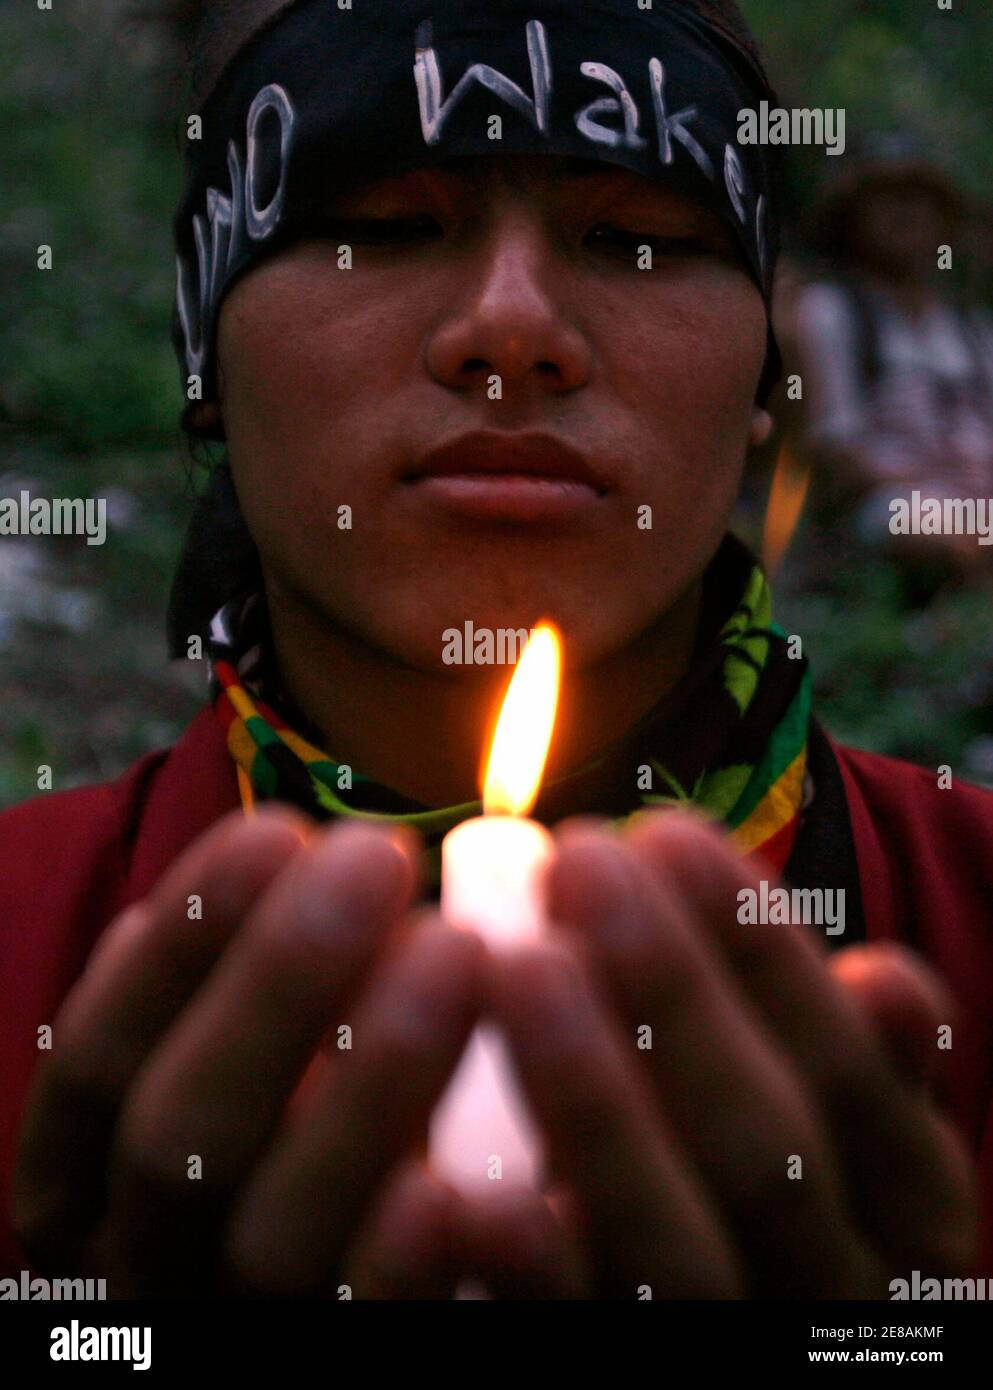 A Tibetan refugee takes part in a candle light vigil, after Indian police stopped a peace rally on its way to the Indo-China border at Nathula, at Rangopo village, about 80 km (50 miles) north of the northeastern Indian city of Siliguri March 24, 2008. REUTERS/Rupak De Chowdhuri (INDIA) Stock Photo